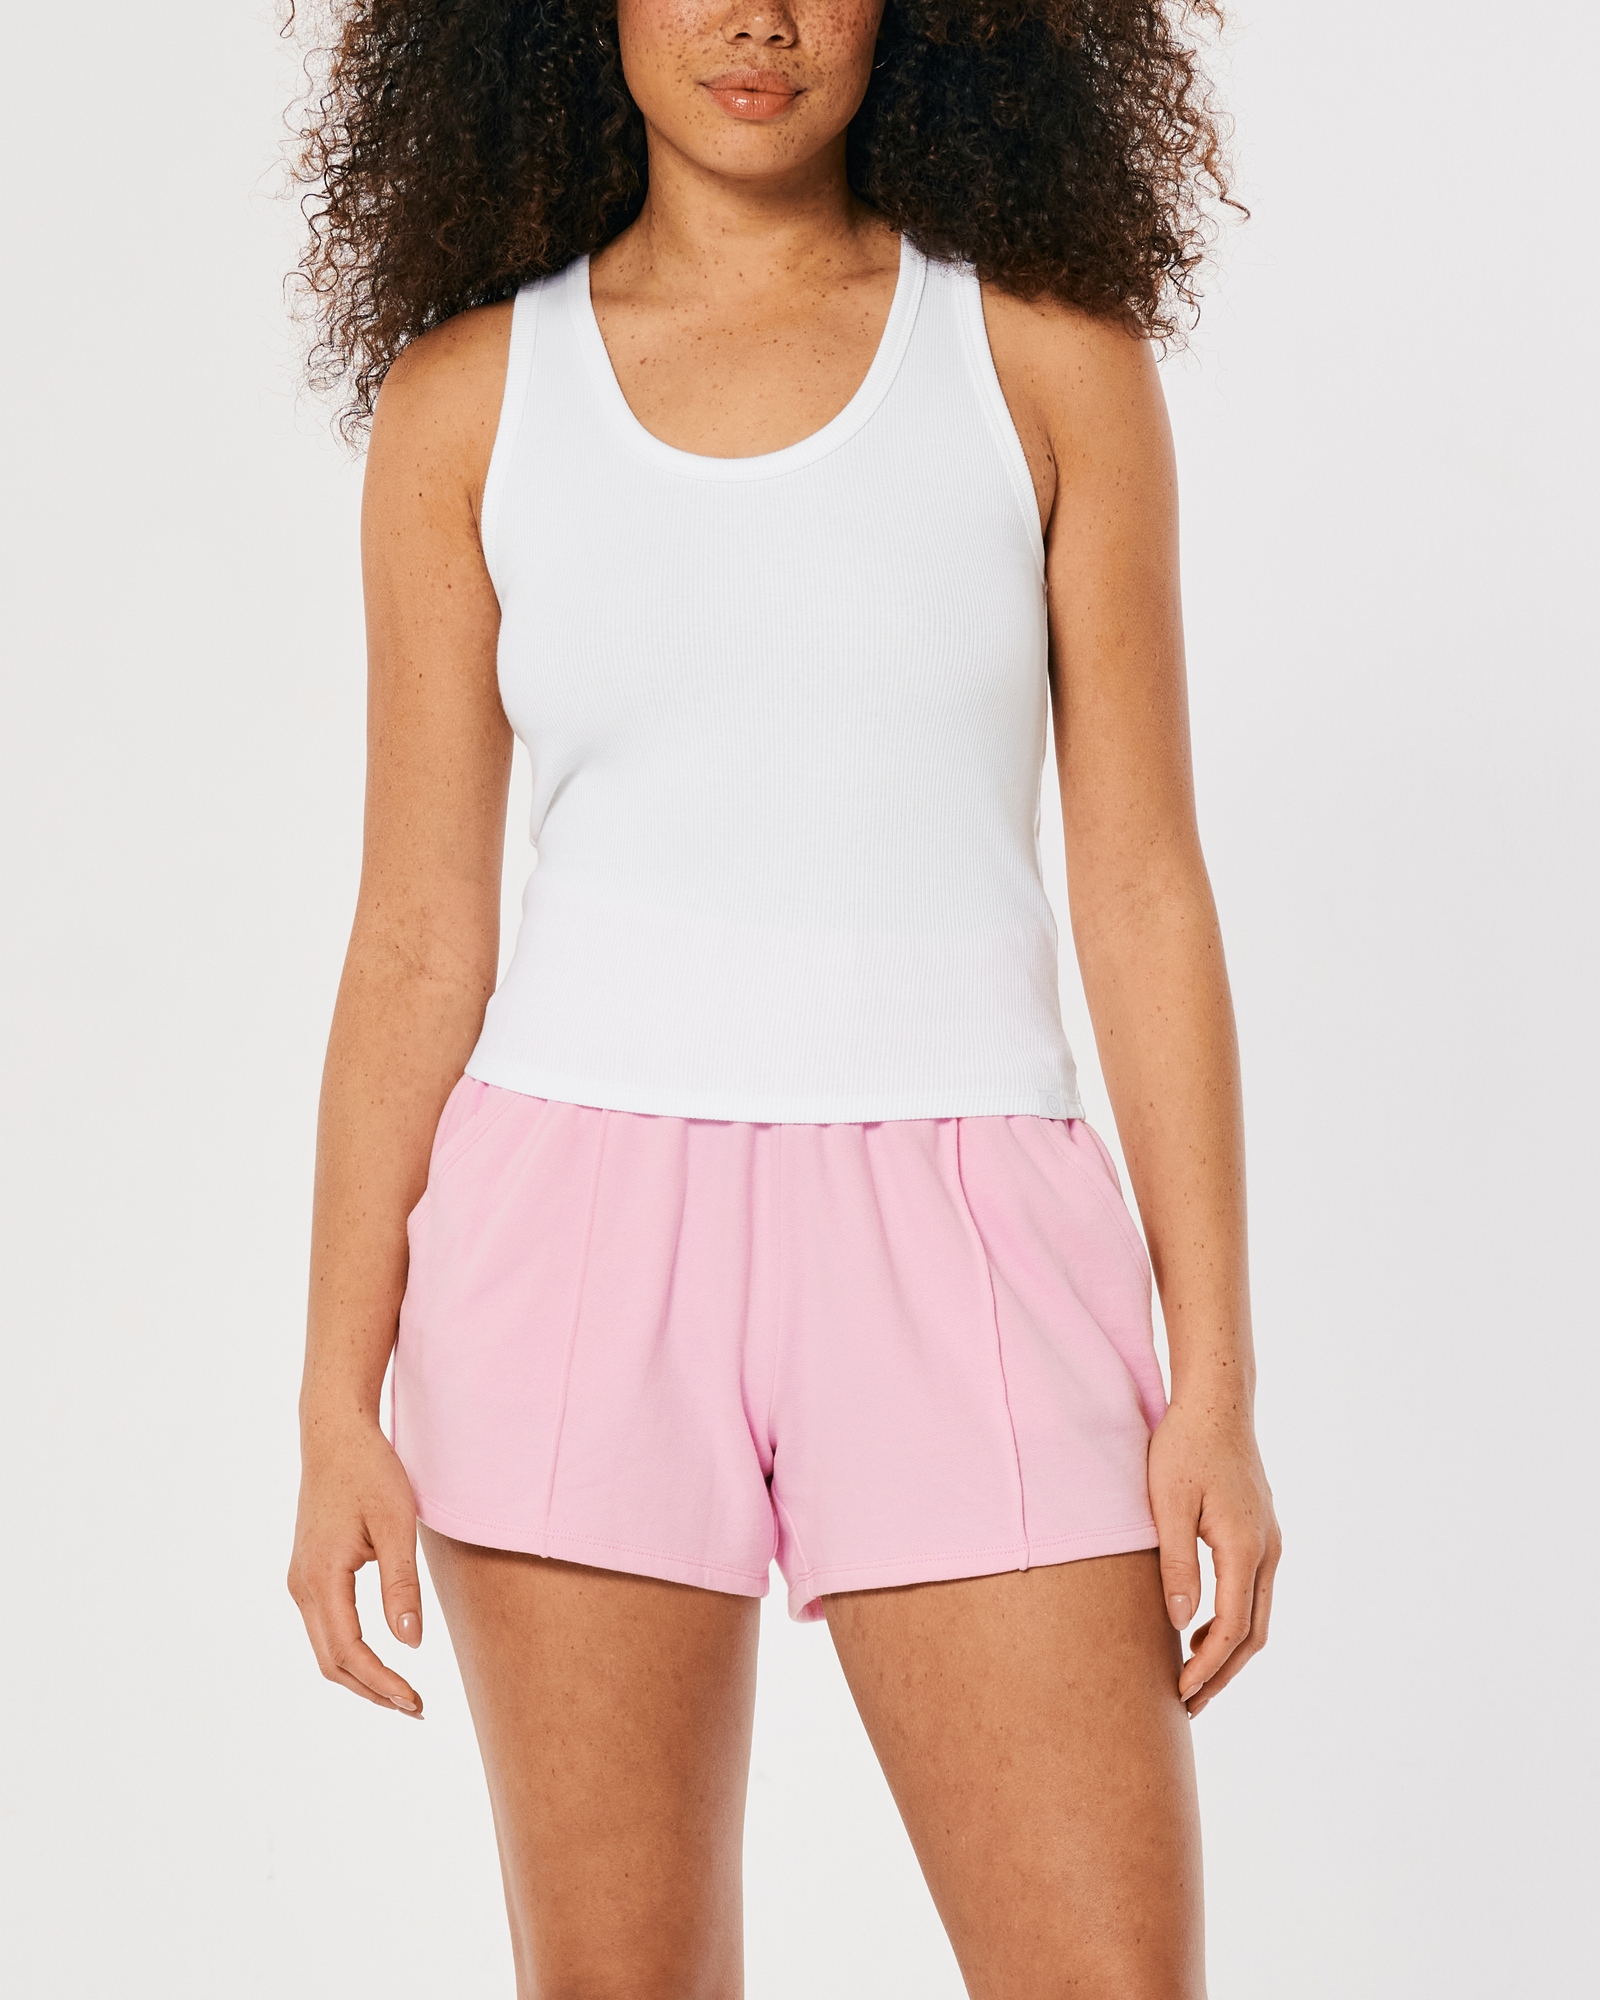 Hollister Gilly Hicks Active Essentials Ribbed Cotton Tank